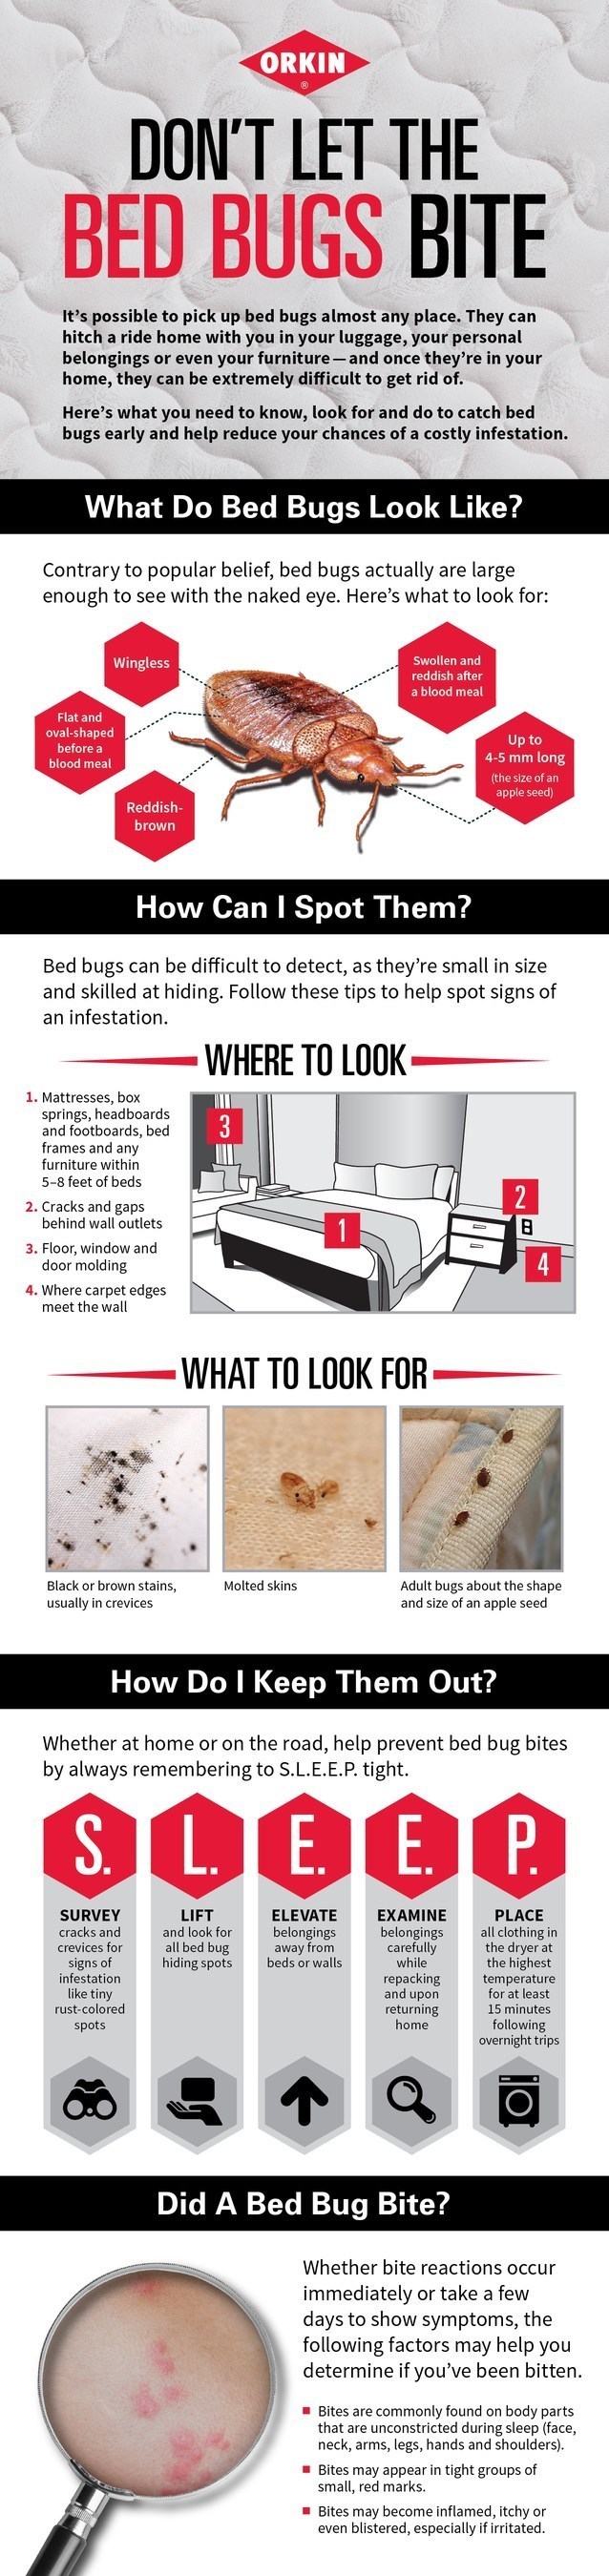 Don't let the bed bugs bite! Bed bugs are great hitchhikers and can make their way onto you or your belongings. Once in your home, bed bugs can be difficult to get rid of. Here are some tips to help you identify and prevent bed bugs from coming into your home.